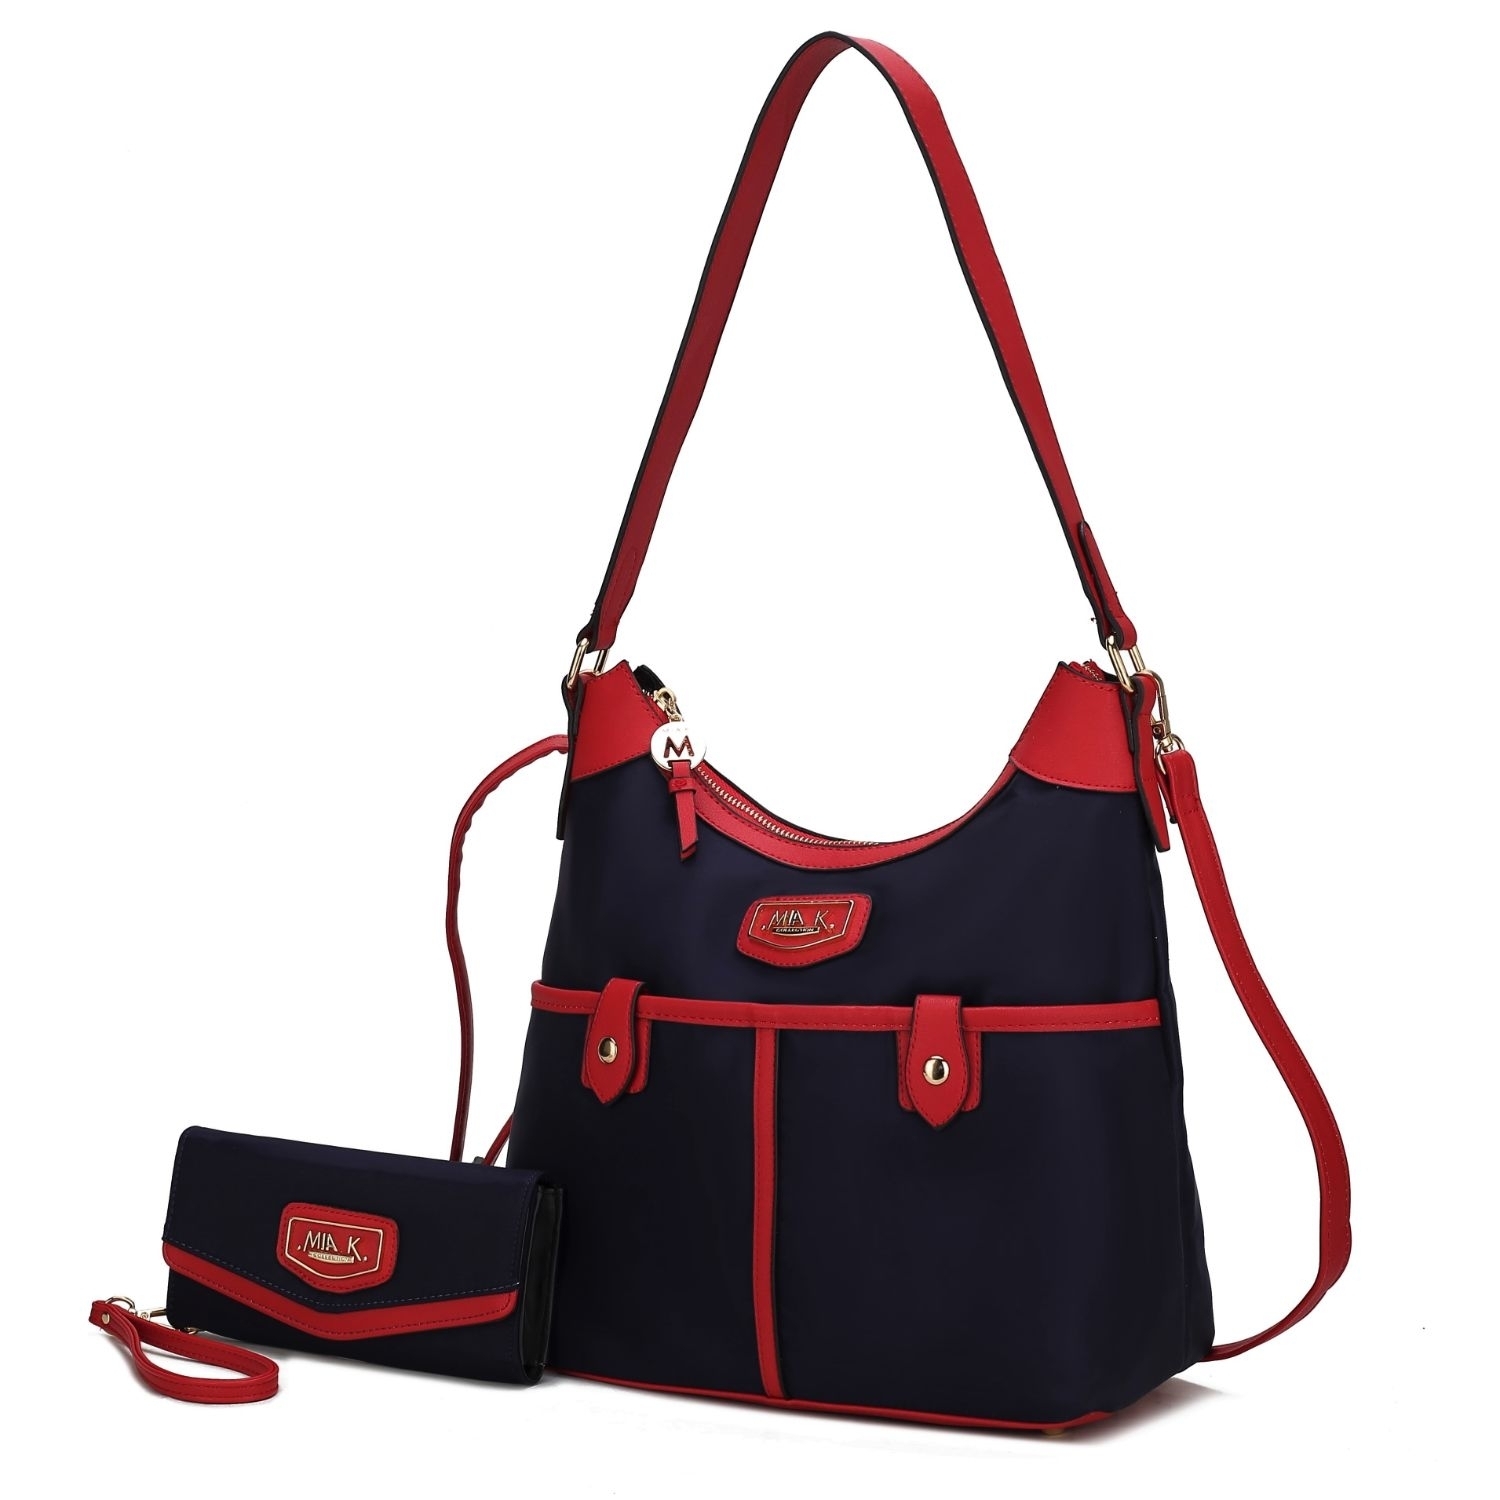 MKF Collection Harper Nylon Hobo Shoulder Handbag With Matching Wallet By Mia K- 2 Pieces - Navy